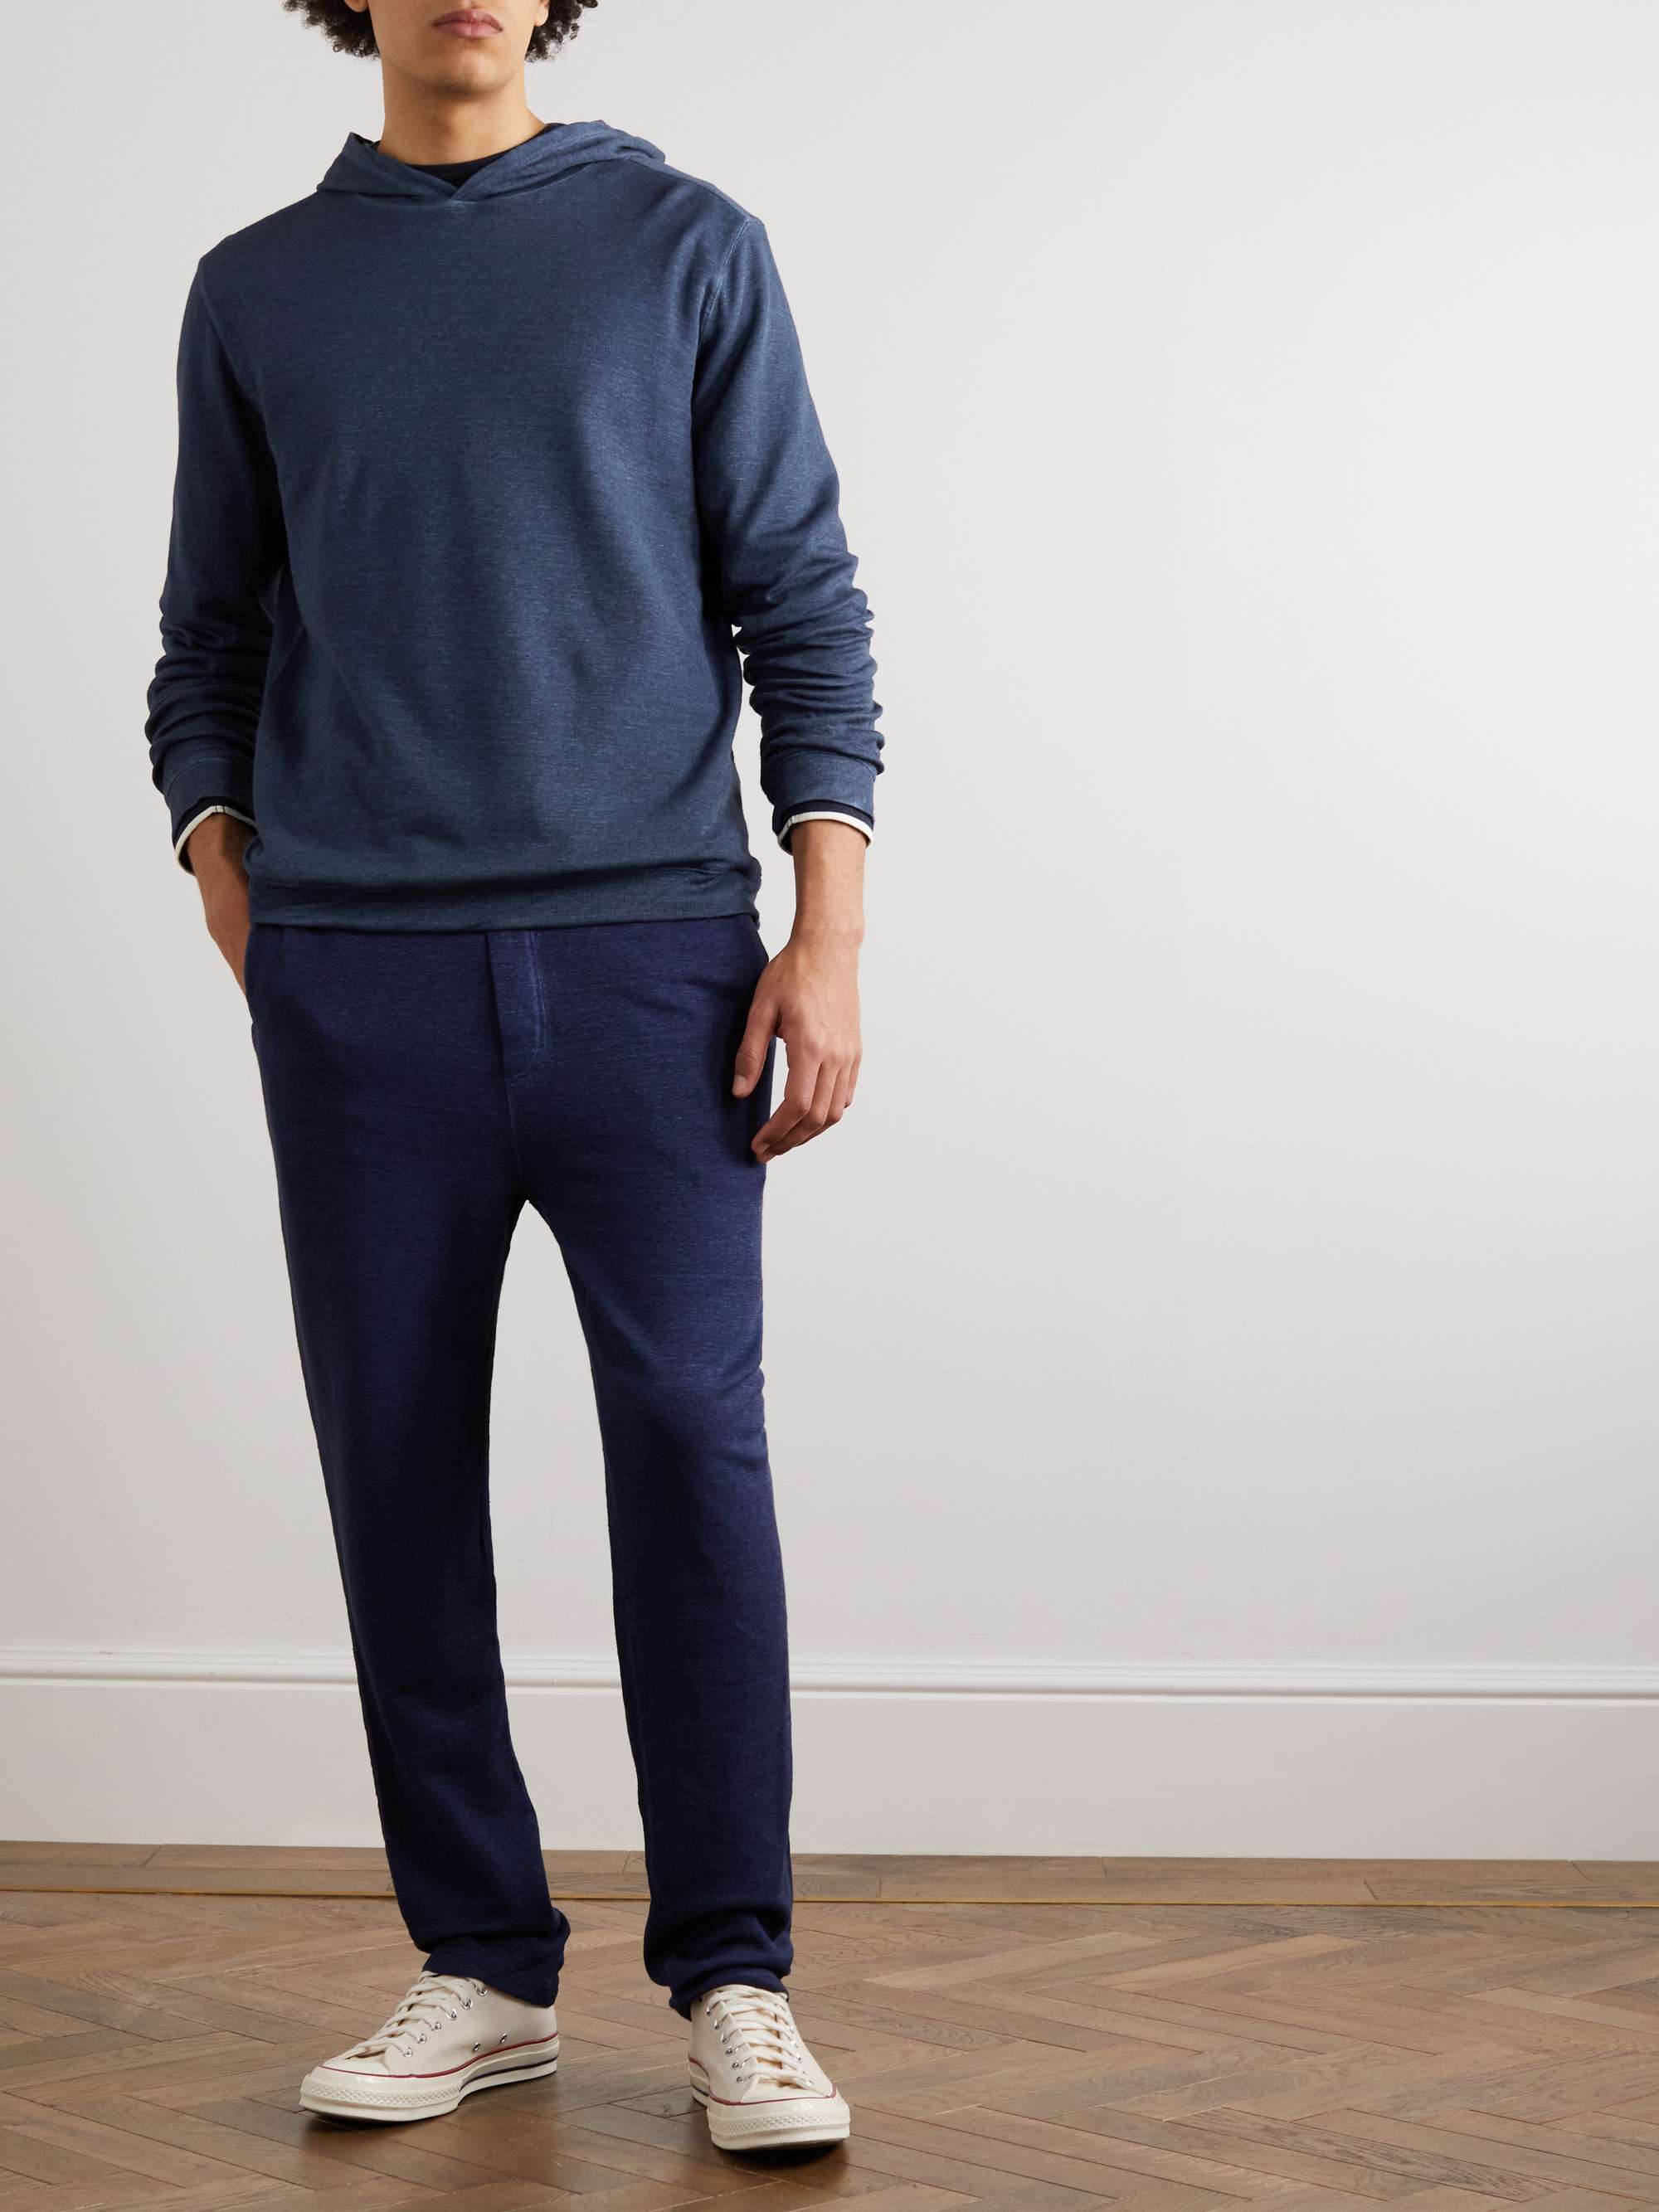 120% LINO Stretch-Linen and Cotton-Blend Hoodie for Men | MR PORTER